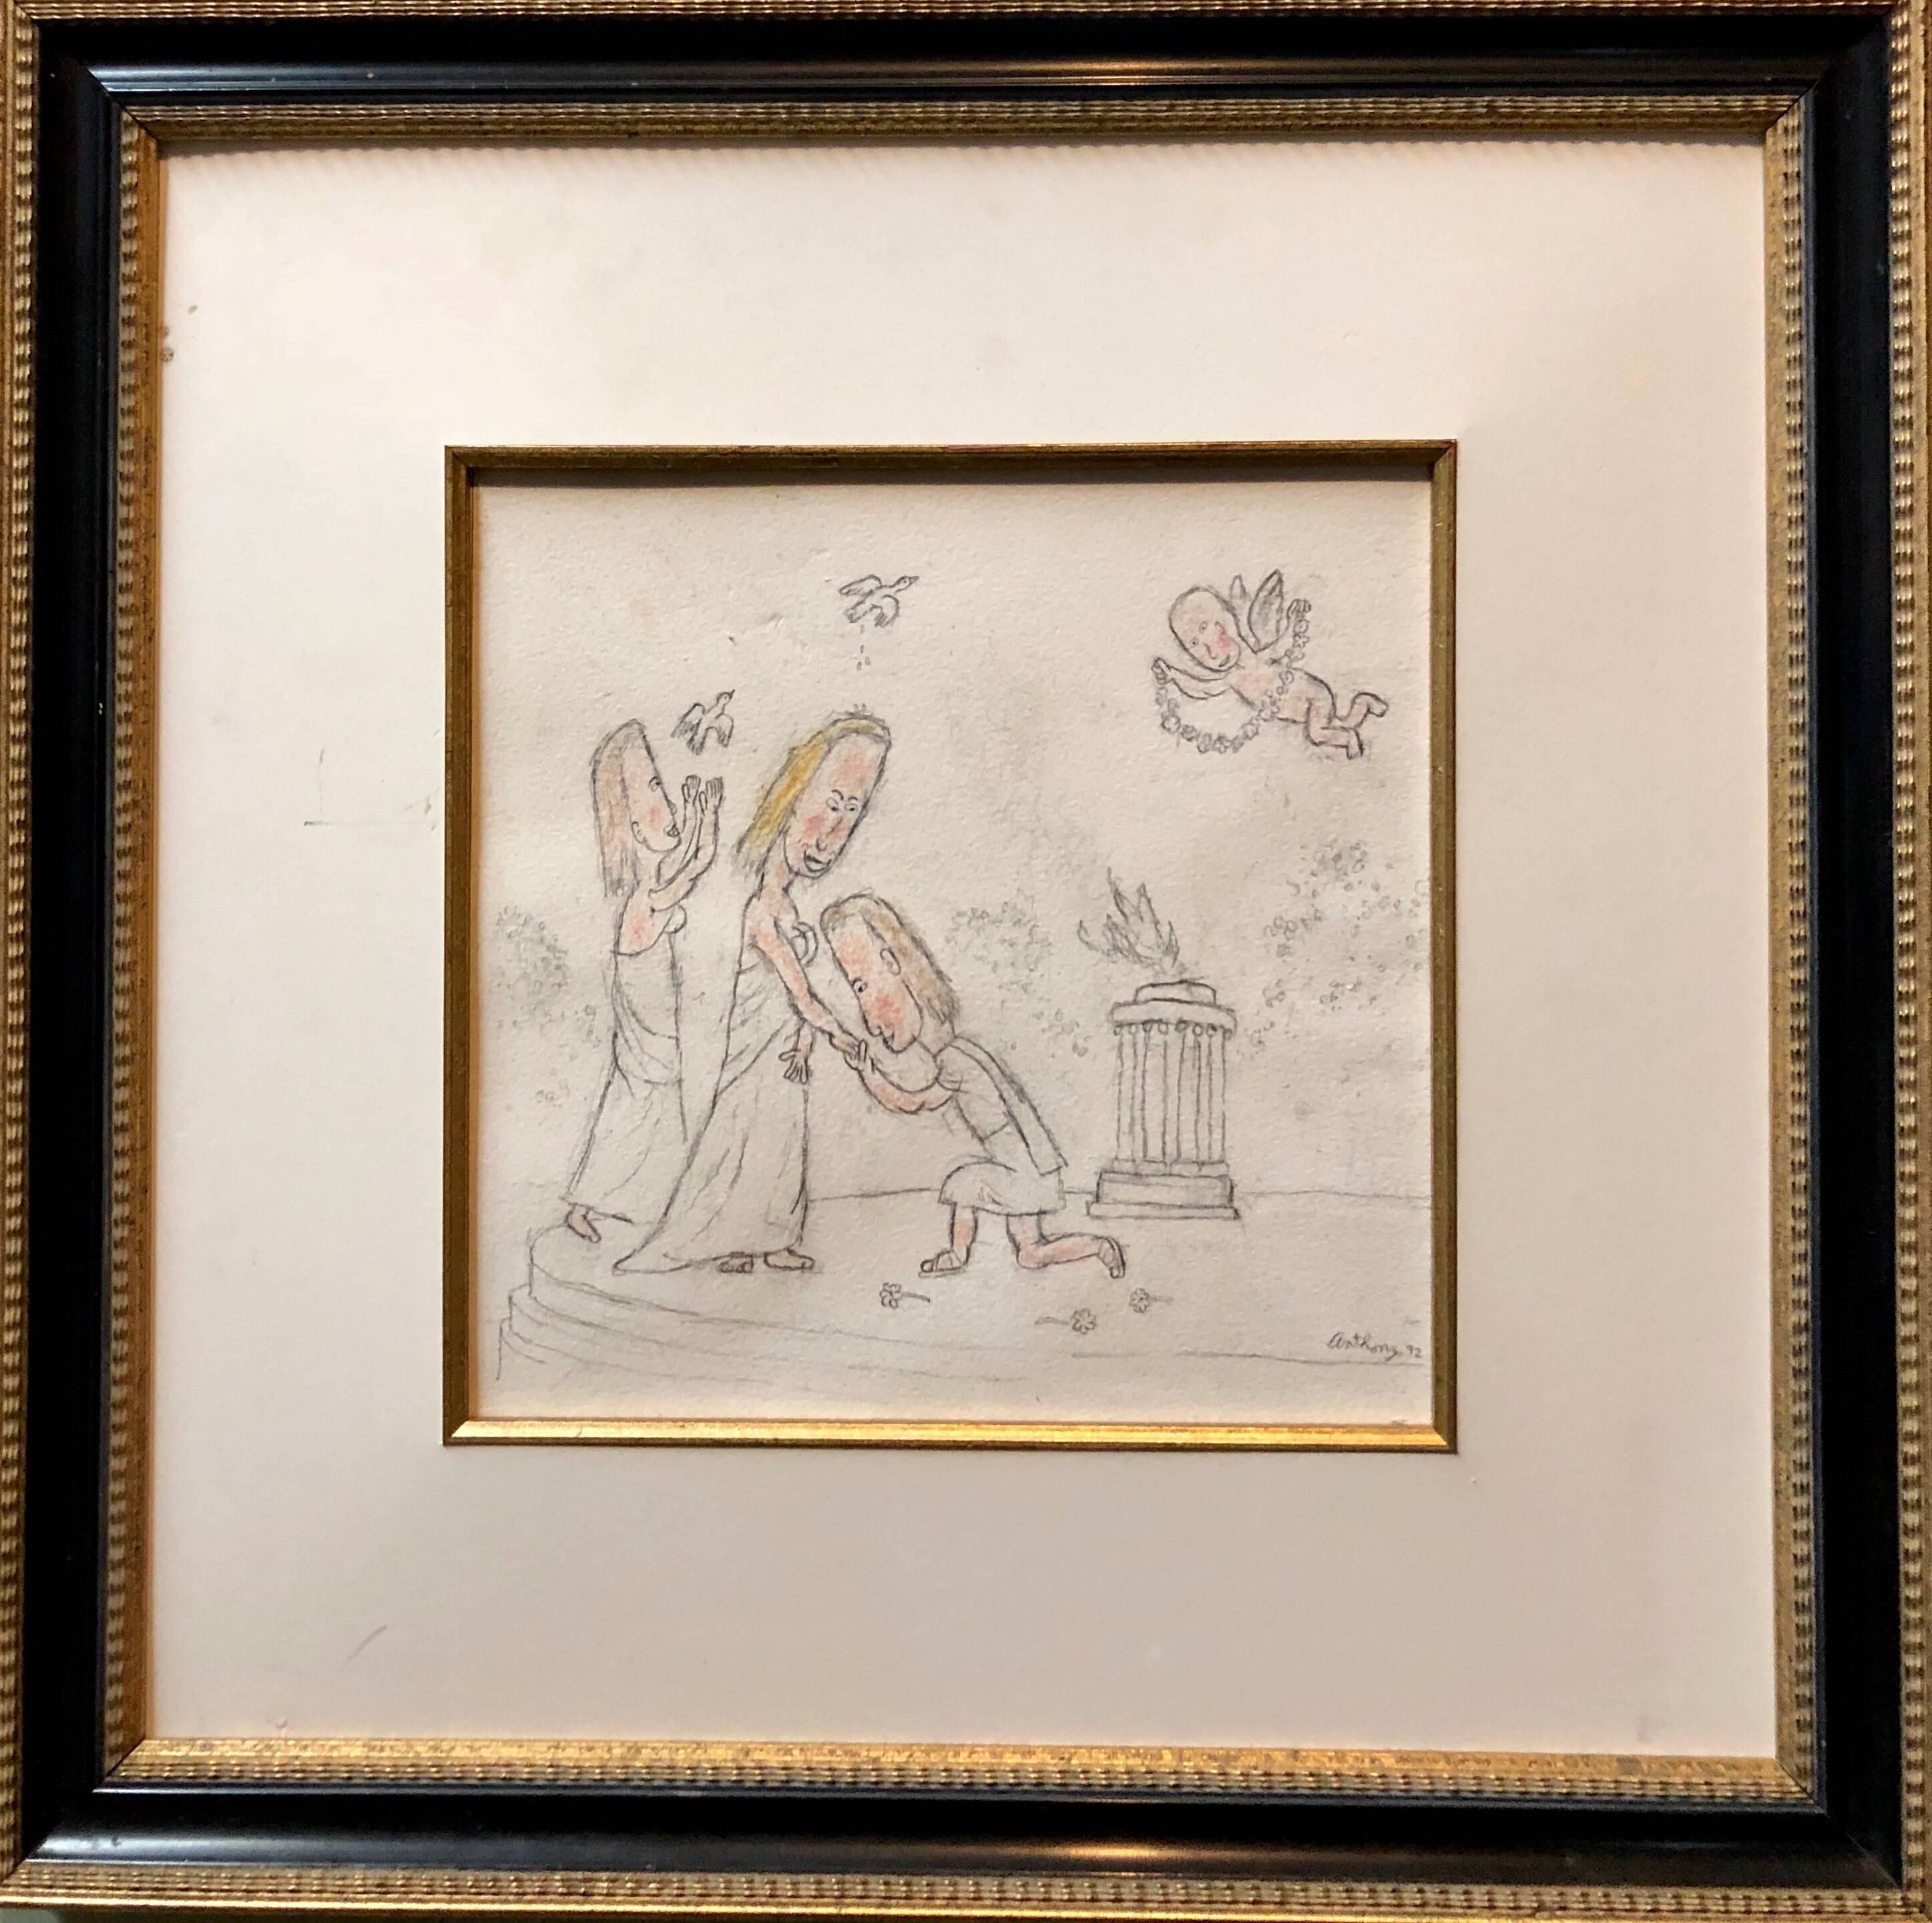  William Anthony 1992 Caricature Drawing Will You Marry Me? For Sale 1